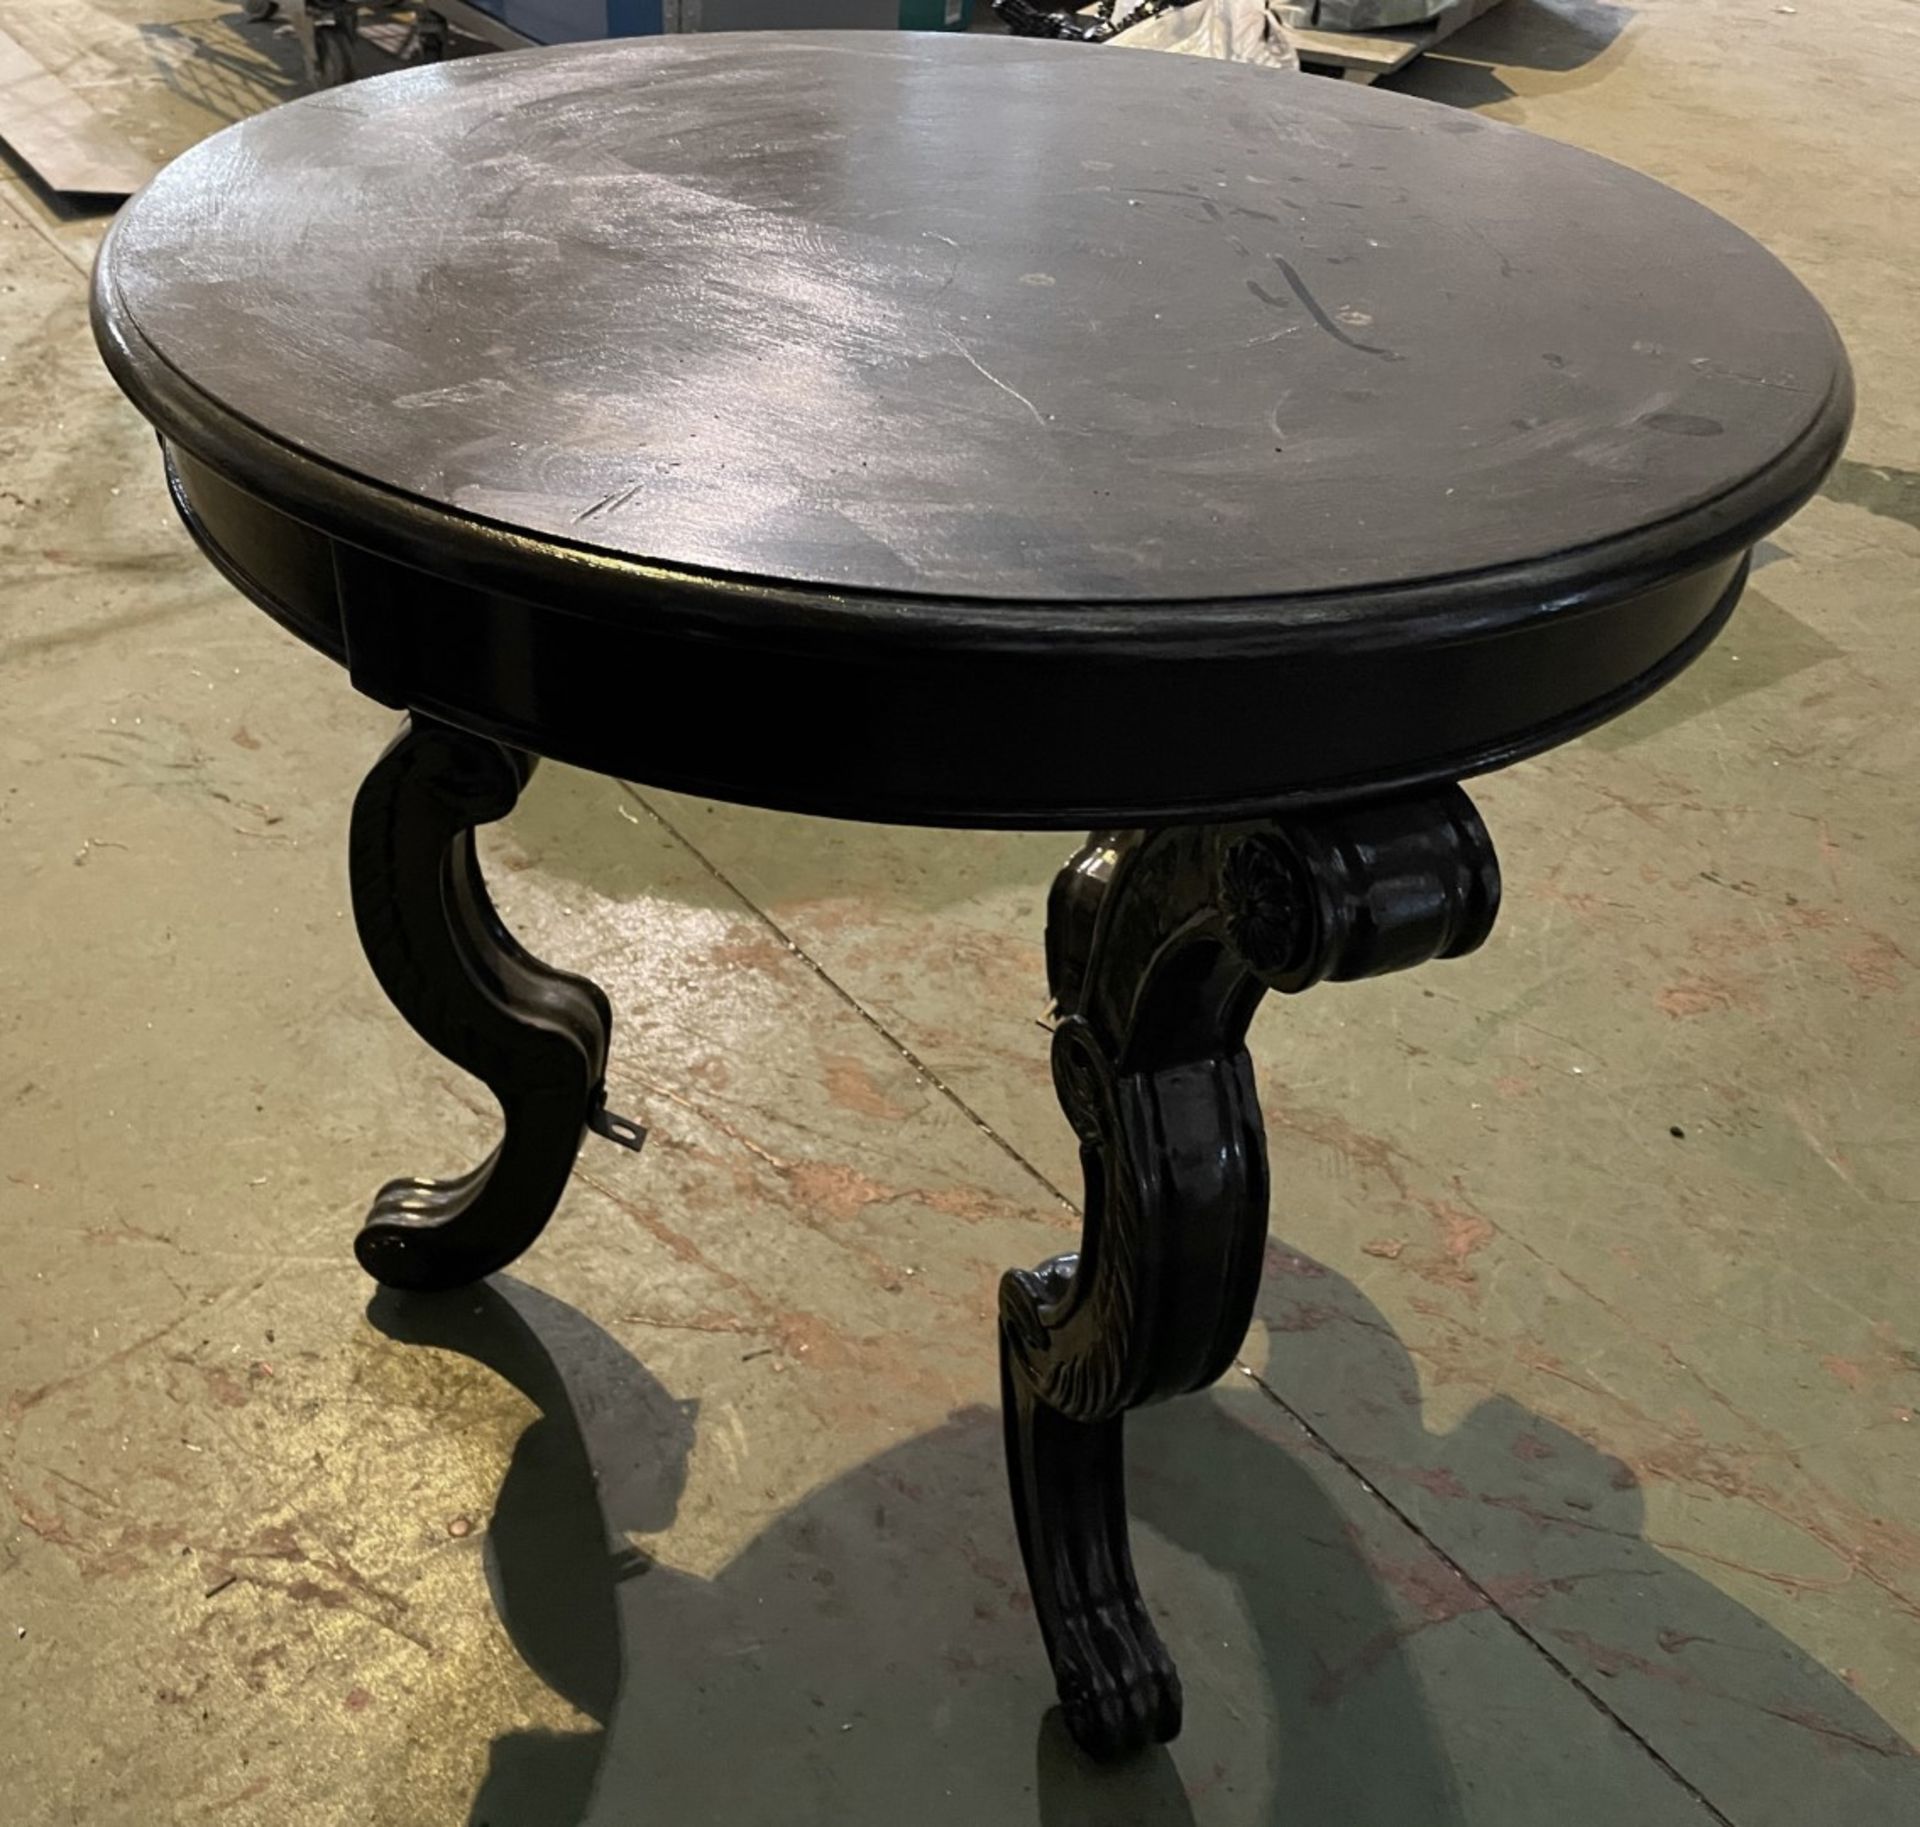 1 x Round Black Painted Wooden Table - Approx 70(D) X 70(H) Cm - Ref: J119 - CL531 - Location: - Image 2 of 5